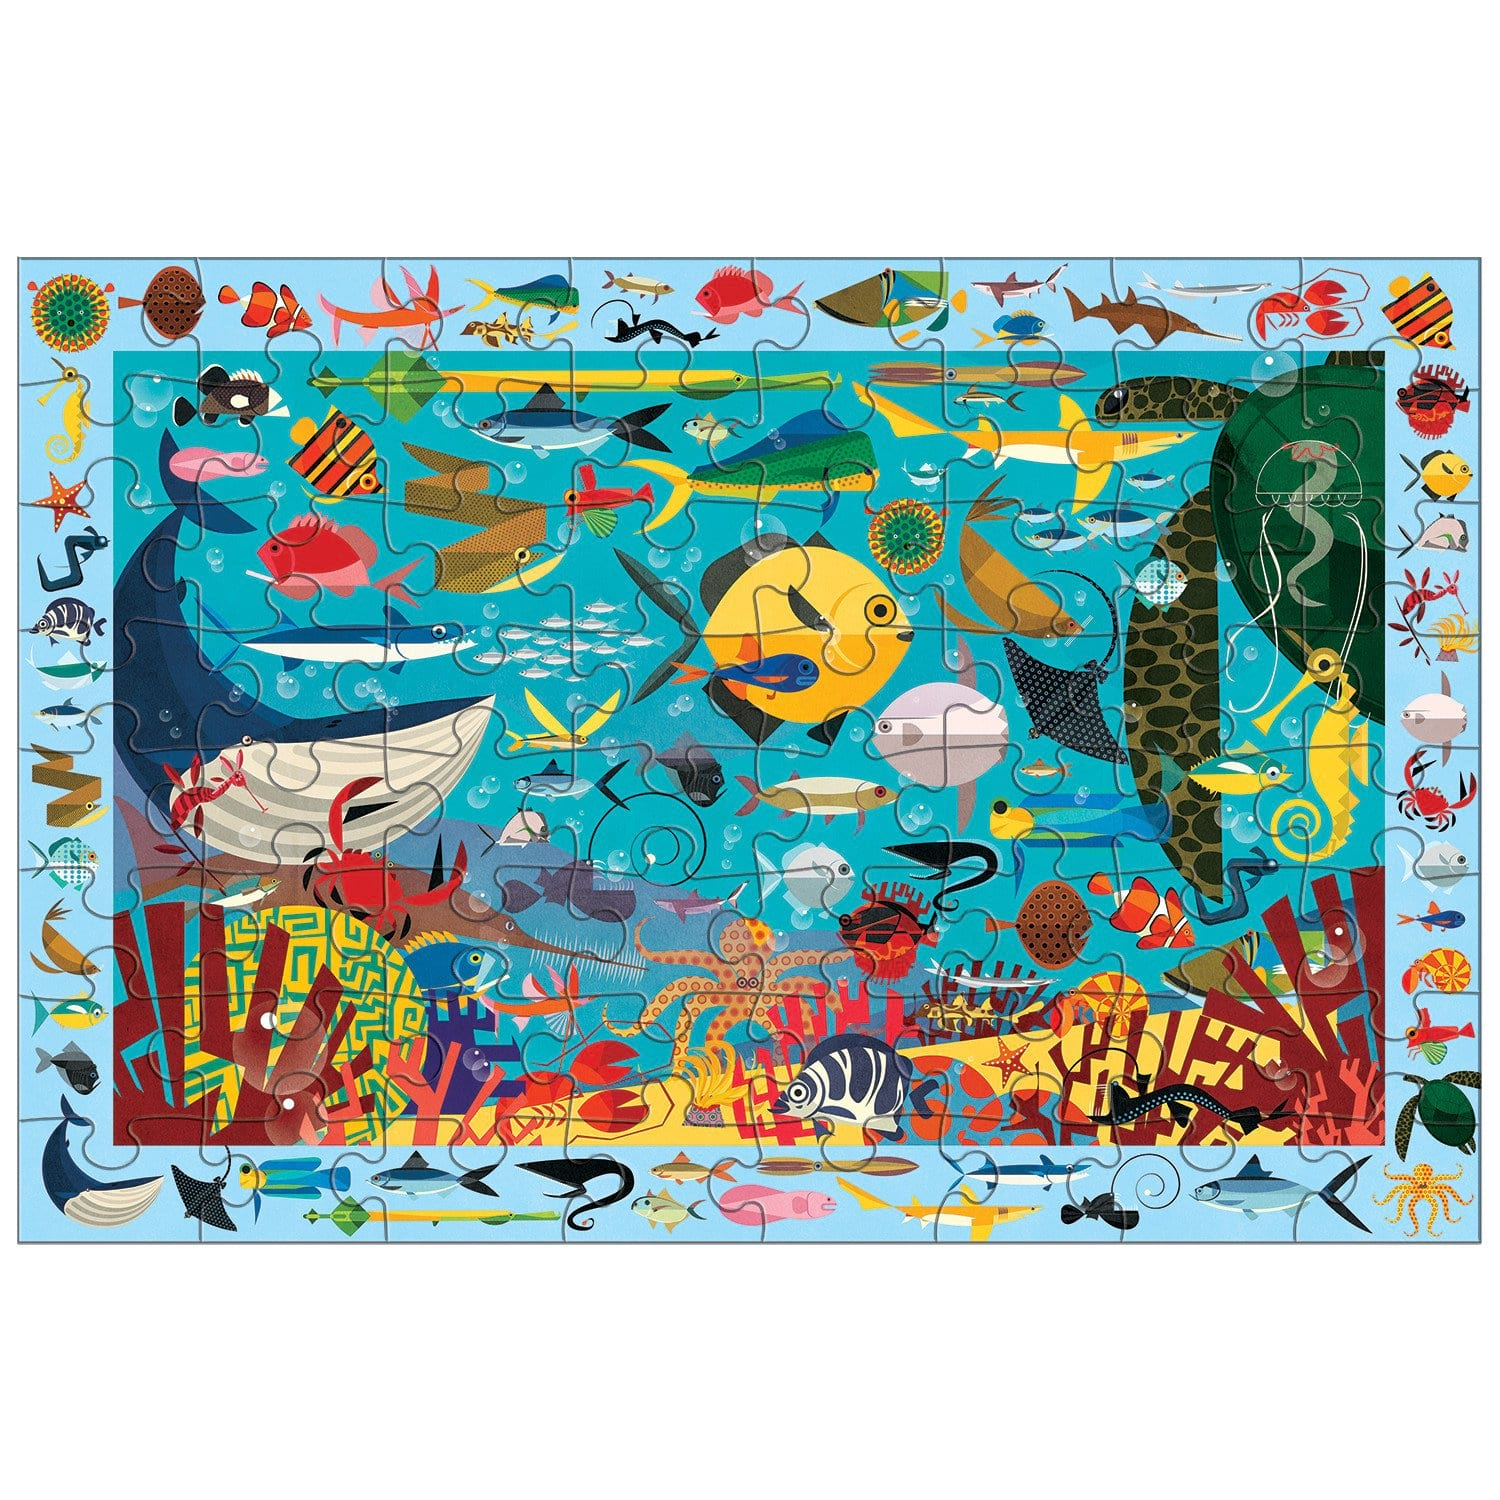 Mud Puppy | Search & Find Puzzle 64pc - Ocean Life